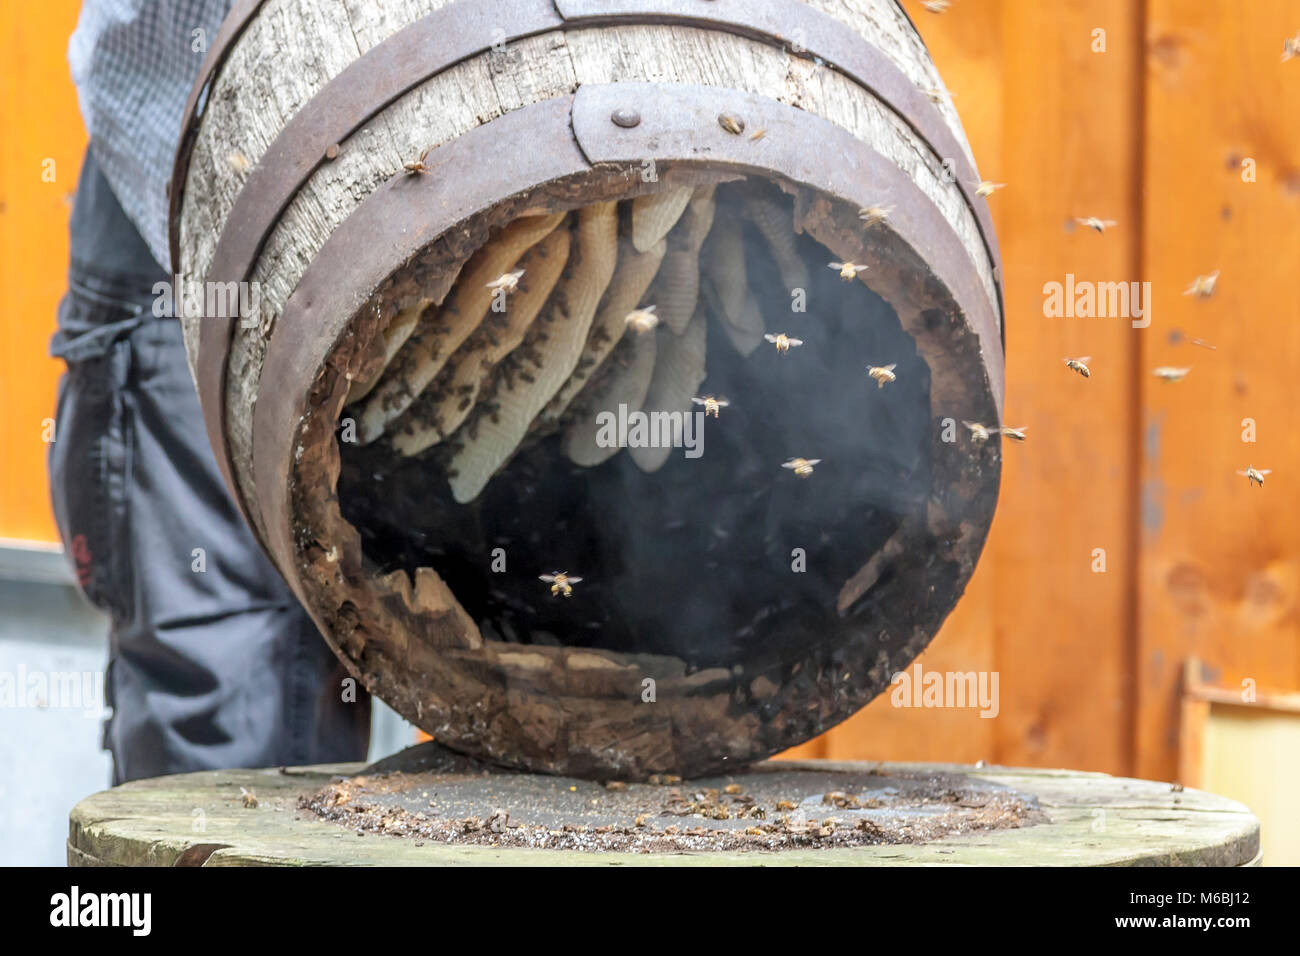 A colony of bees has nested in a wooden beer barrel. Honeybees flying to their Honeycombs inside a wooden Beerbarrel Stock Photo